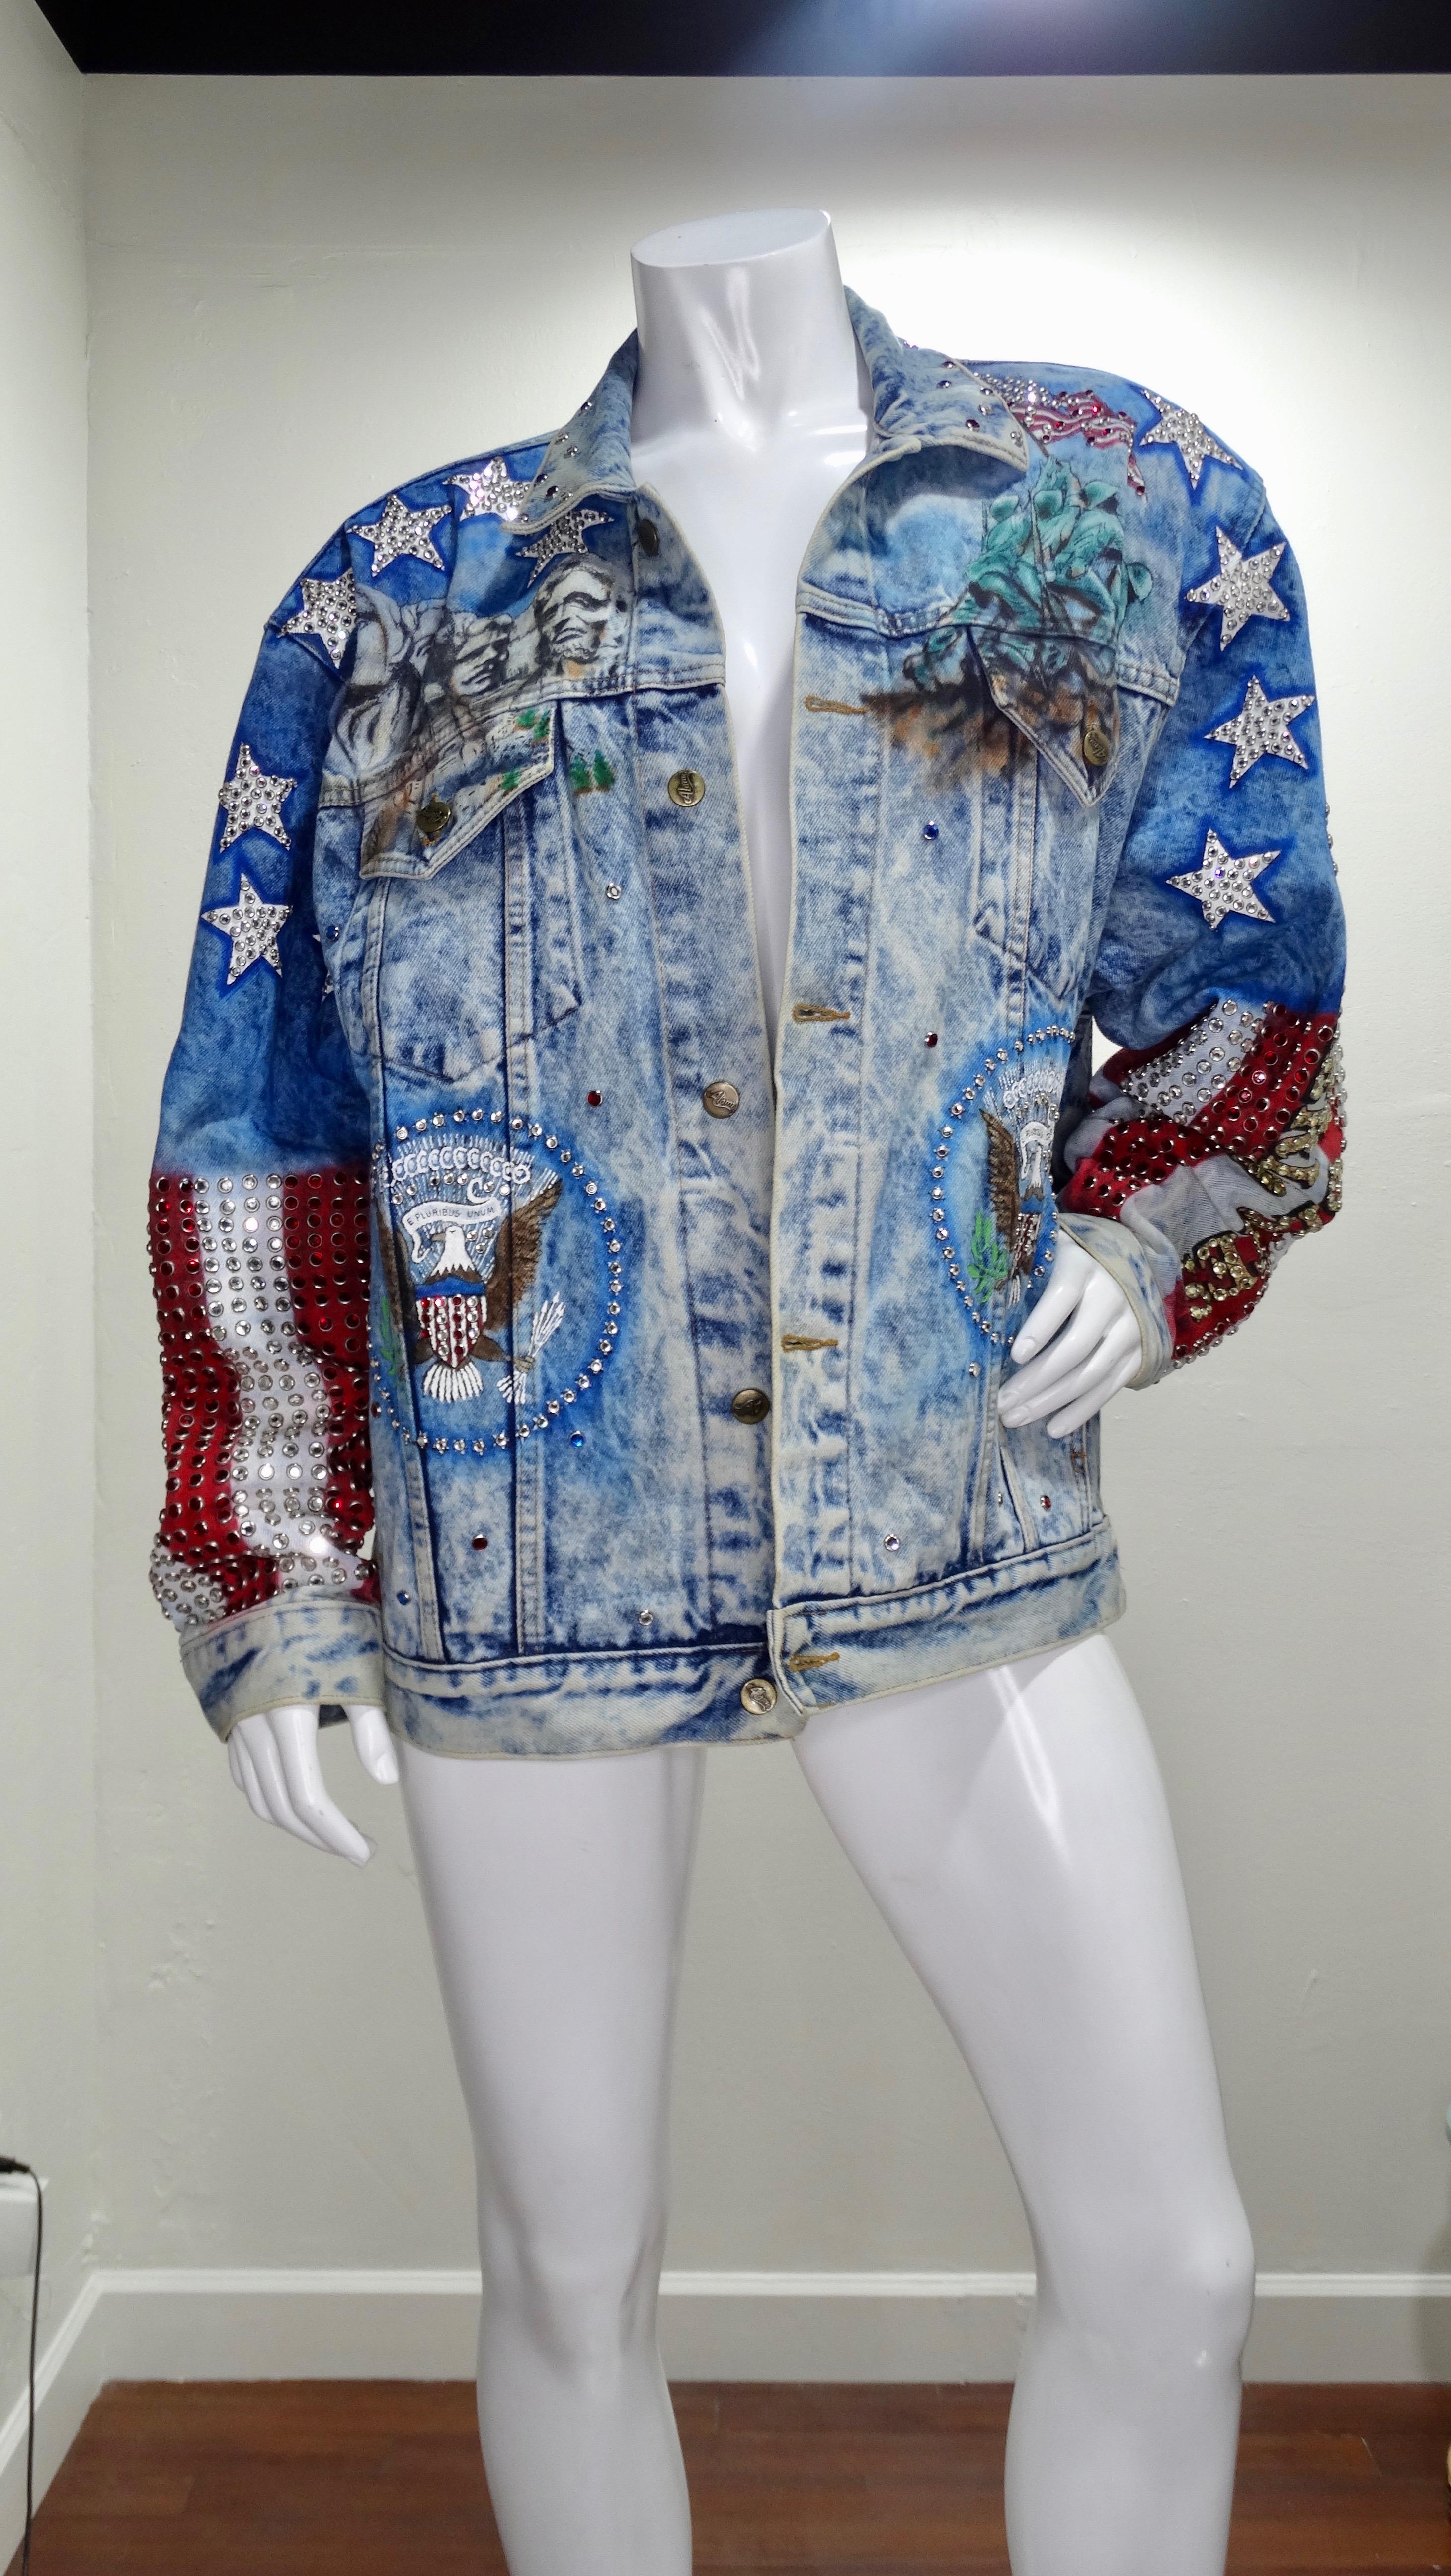 Show off your stars and stripes with this Tony Alamo jean jacket! Circa 1987, this oversized jean jacket features an acid wash, red/white/blue airbrushing, brass toned buttons, two front pockets and eye-catching rhinestone embellishing throughout.